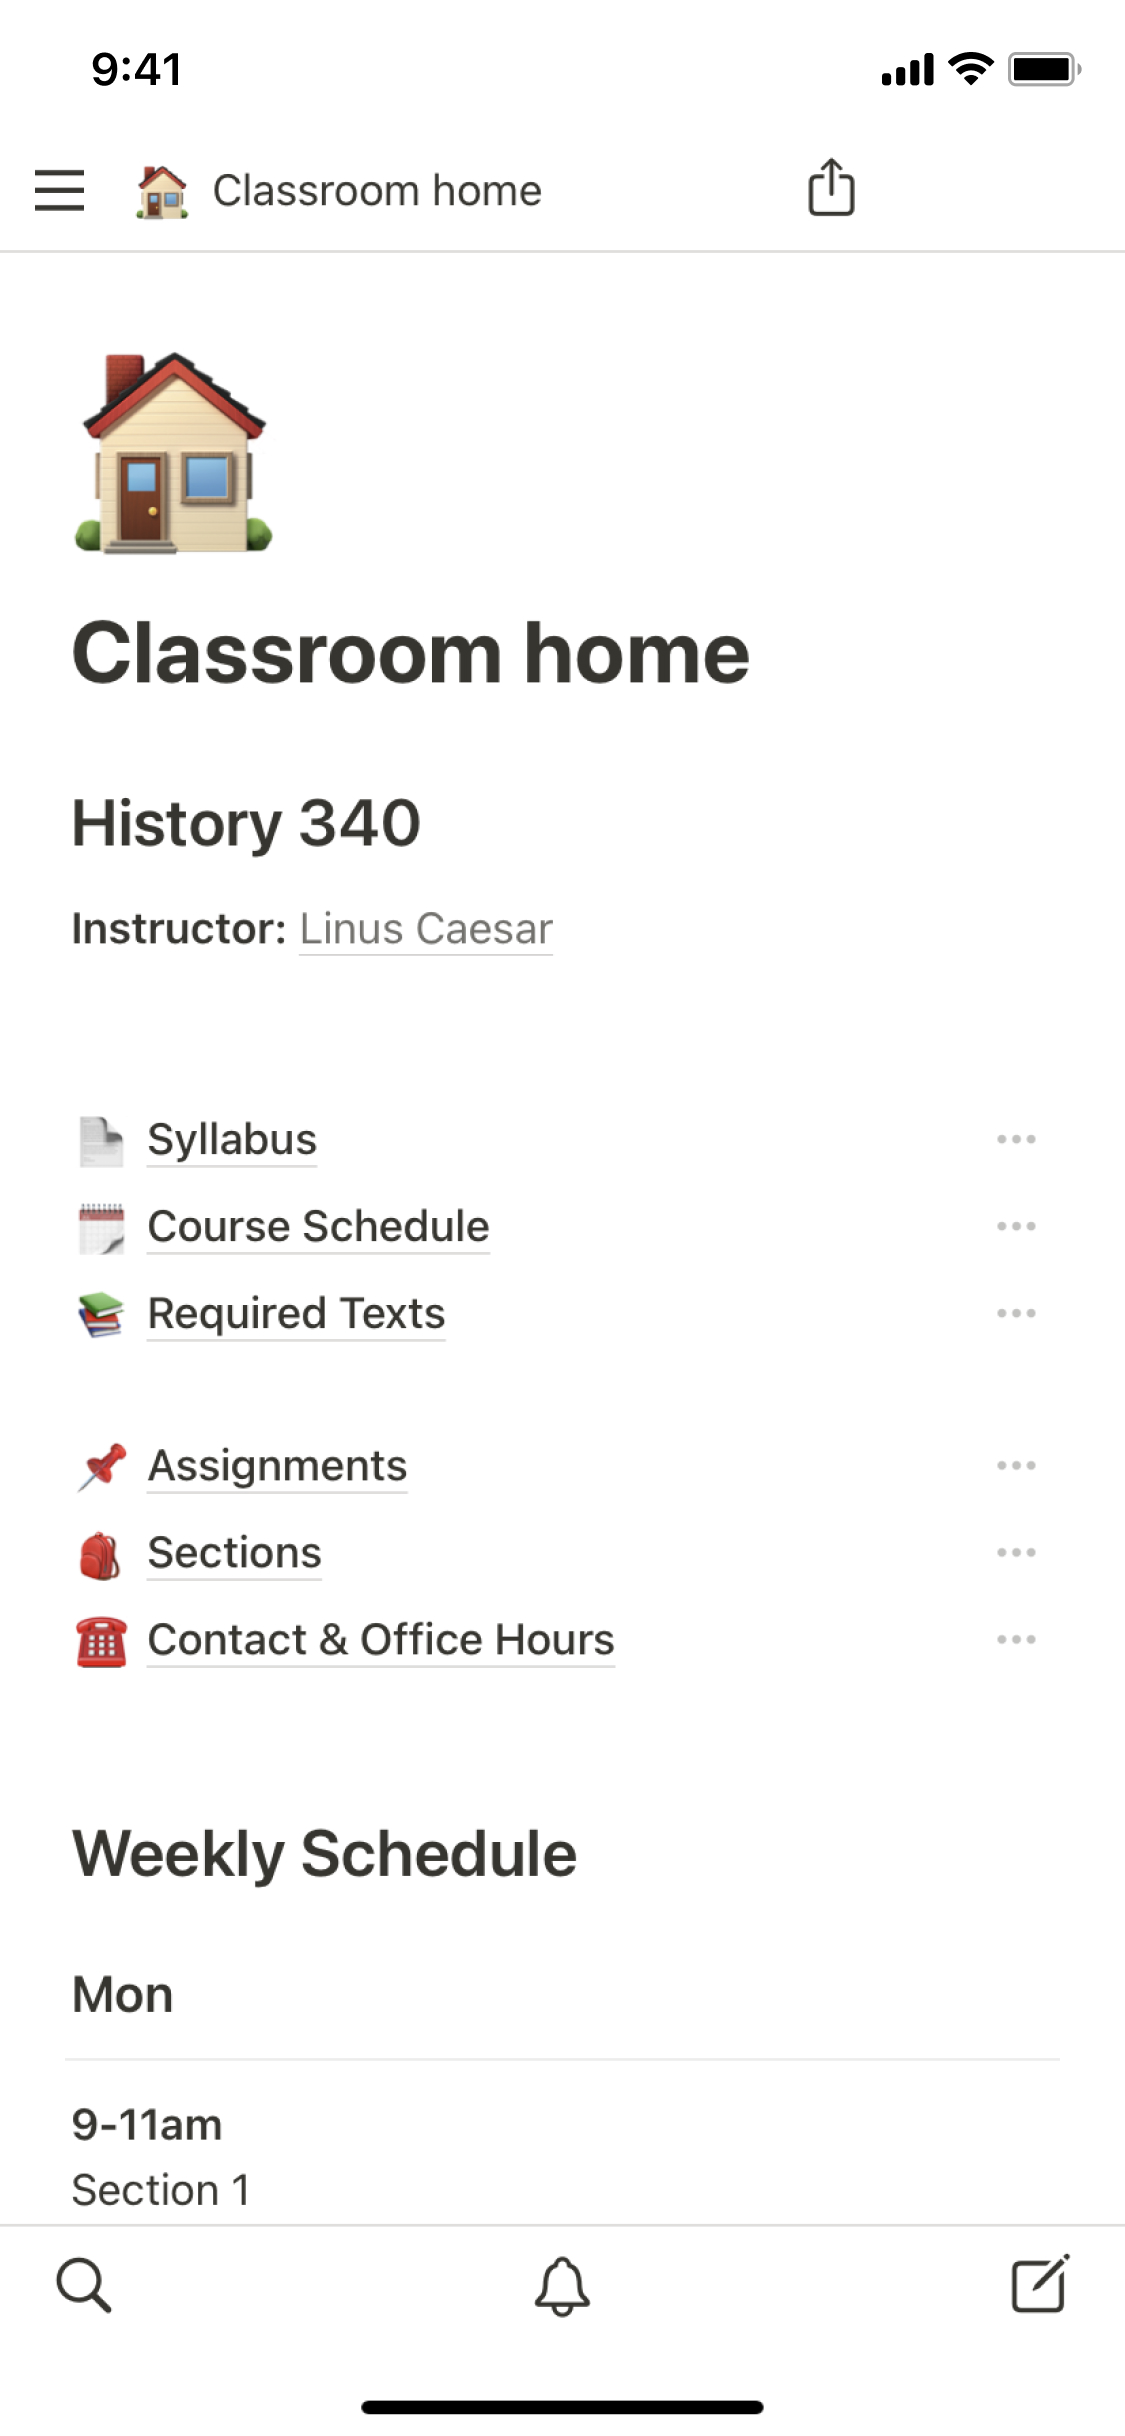 The mobile image for the Classroom home template